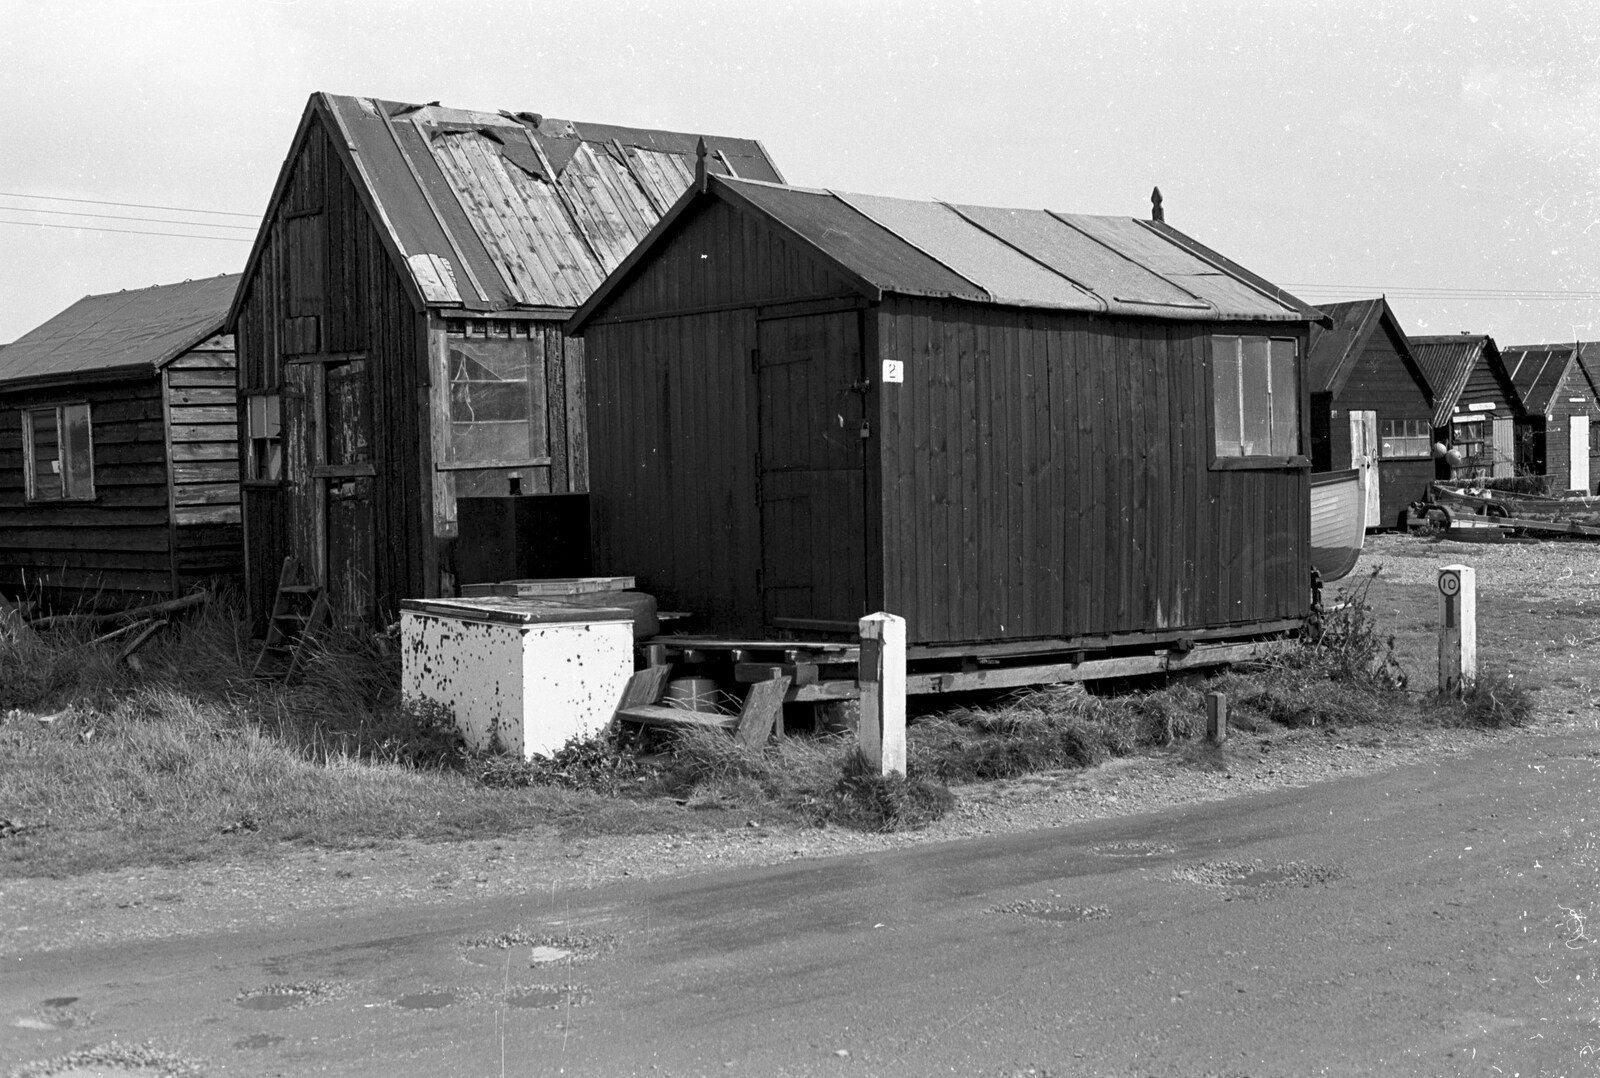 Blackshore Quay in Black and White, Southwold and Sizewell, Suffolk - 16th September 1992: More Blackshore huts